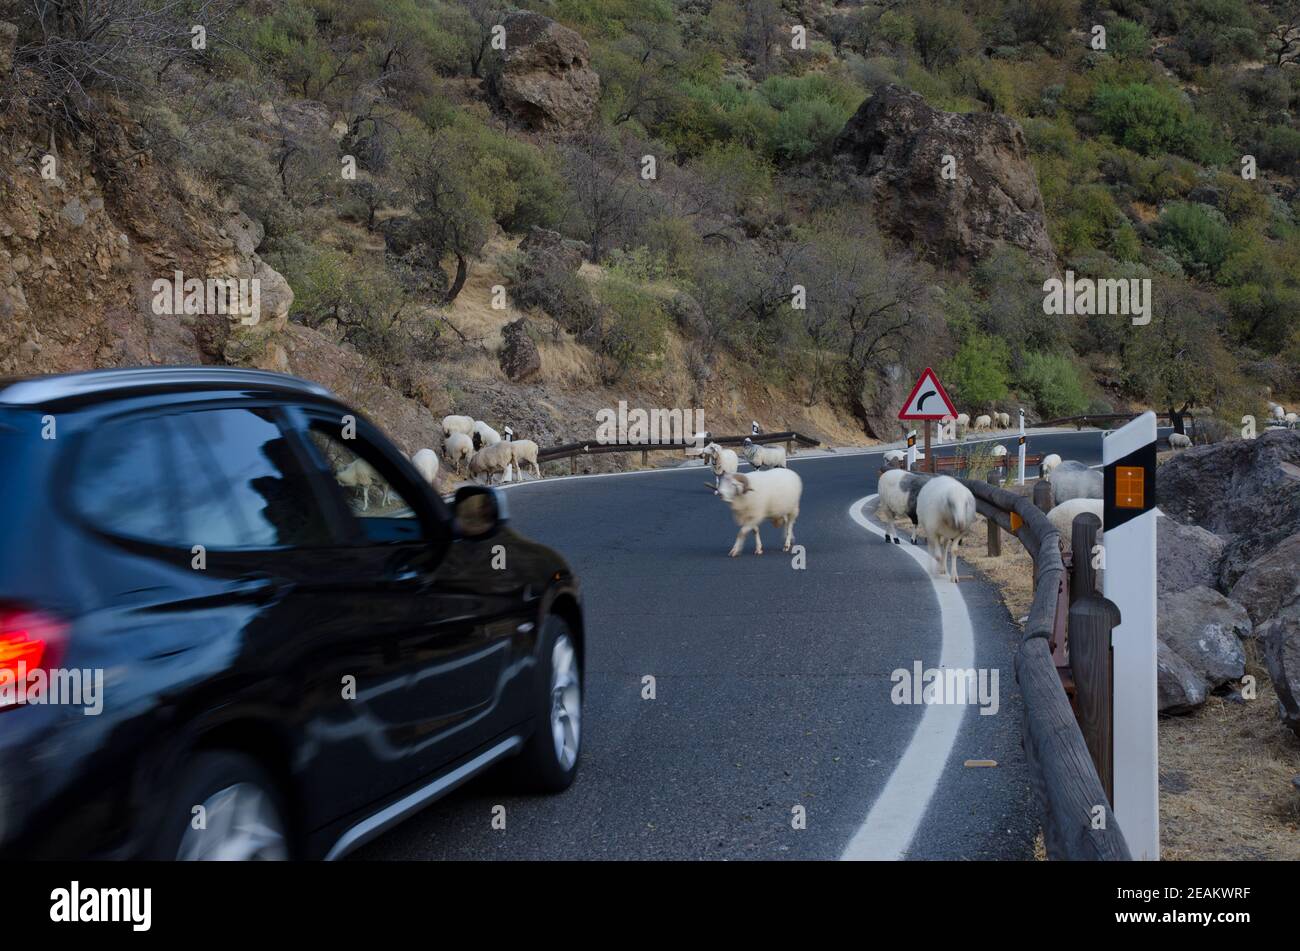 Flock of sheep Ovis aries on the road and car waiting. Stock Photo